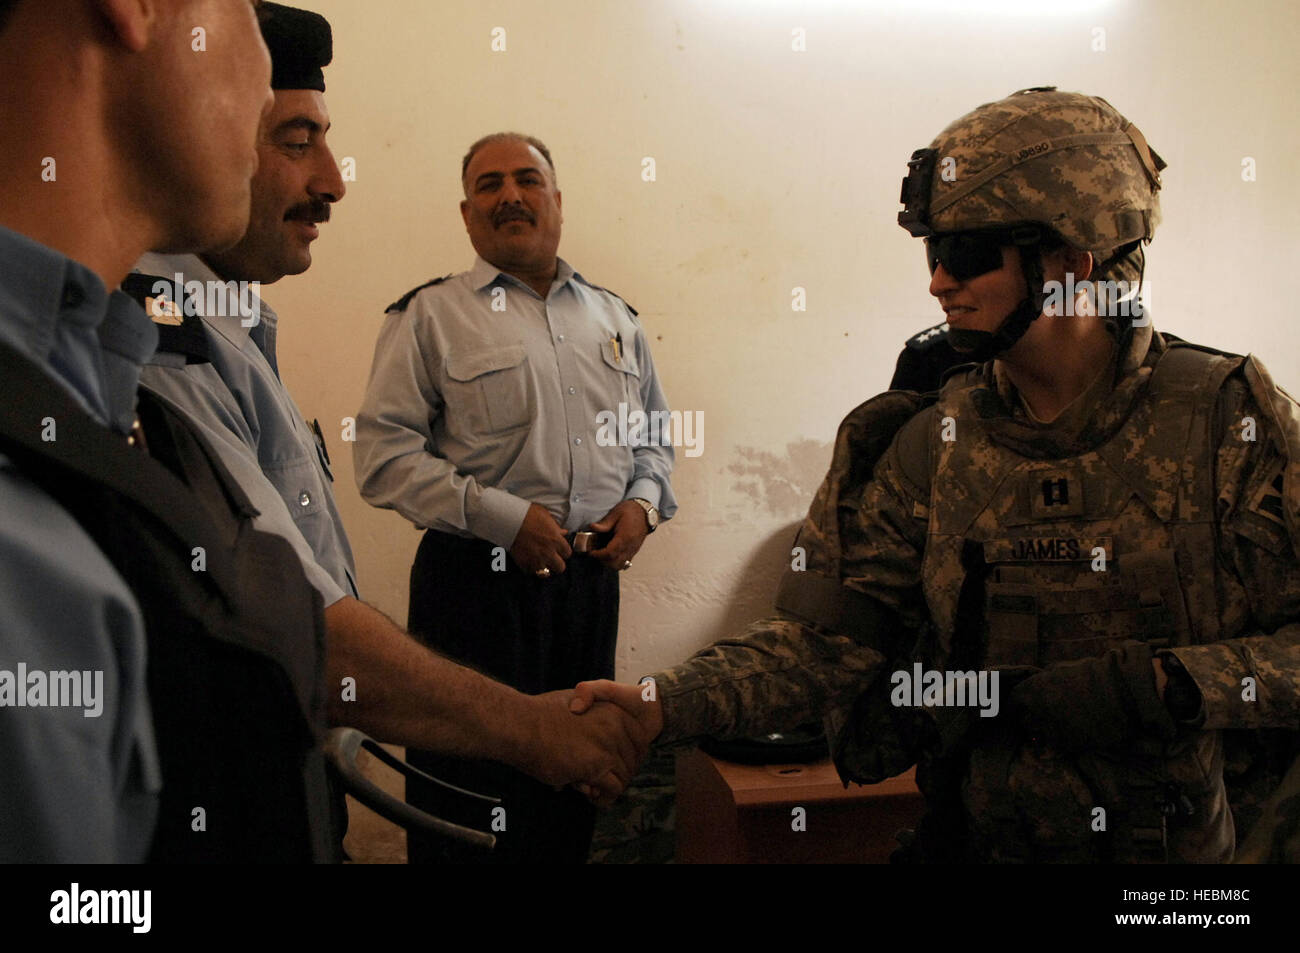 U.S. Army Capt. Norma James, commander of the 411th Military Police Company, 716th Military Police Battalion, 101st Airborne Division, meets with Iraqi police officials at the Abayachi Iraqi police station in the Tarmiya Province of Iraq March 30, 2008. (U.S. Air Force photo by Tech. Sgt. William Greer) (Released) Stock Photo